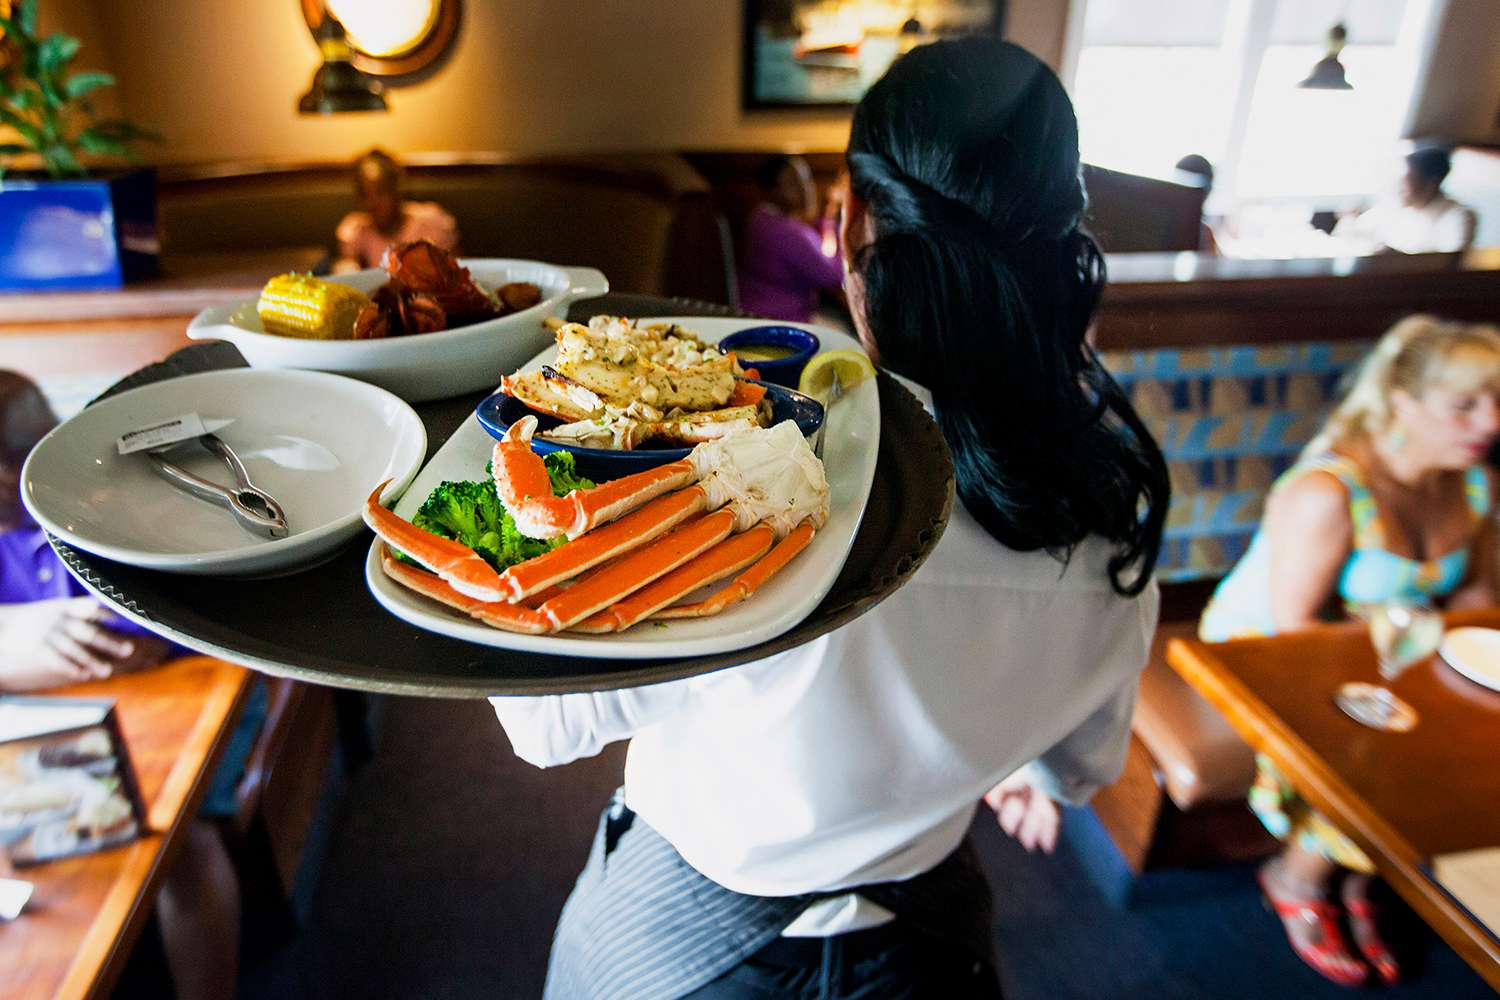 A waitress carries a tray a lobster kettle and a crab trio dish at a Red Lobster restaurant